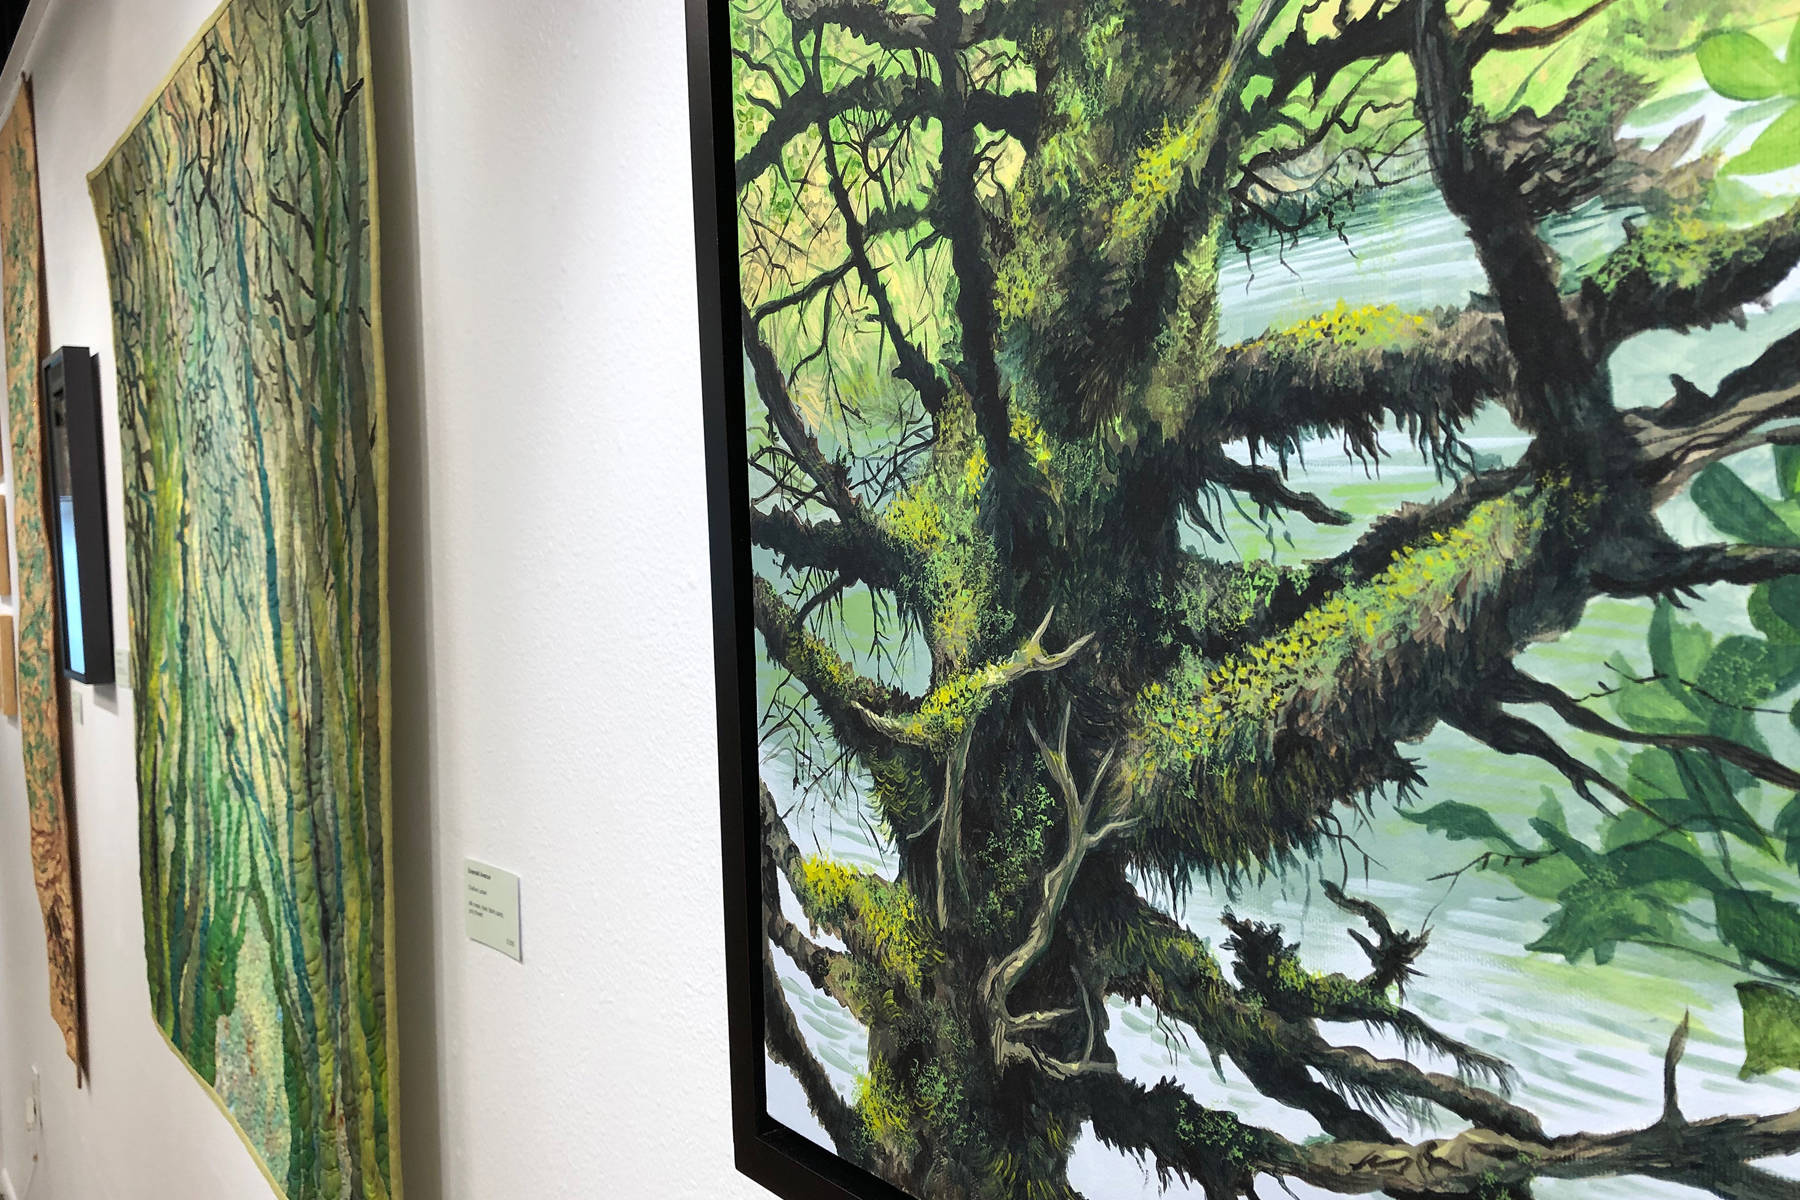 Larsen brings love of forest, trees to life in July exhibit